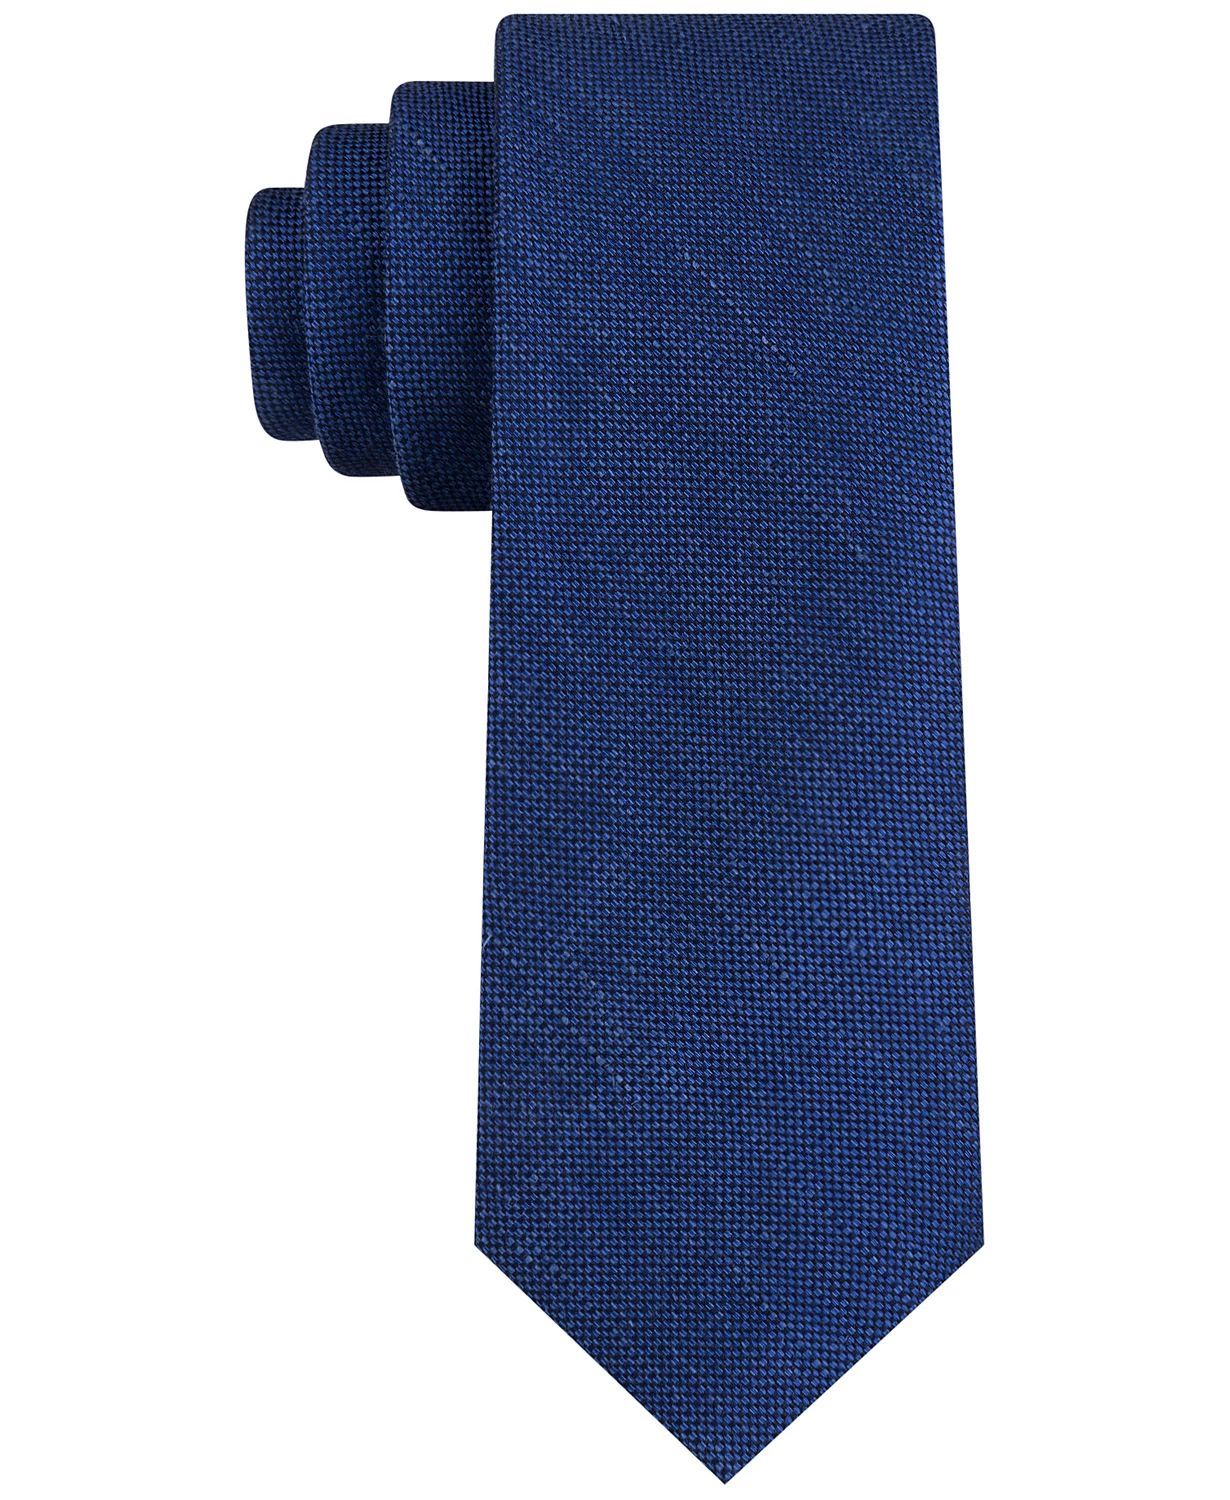 Color: Blues Size: One Size Pattern: Solid Type: Tie Width: Skinny (Material: Linen Blends